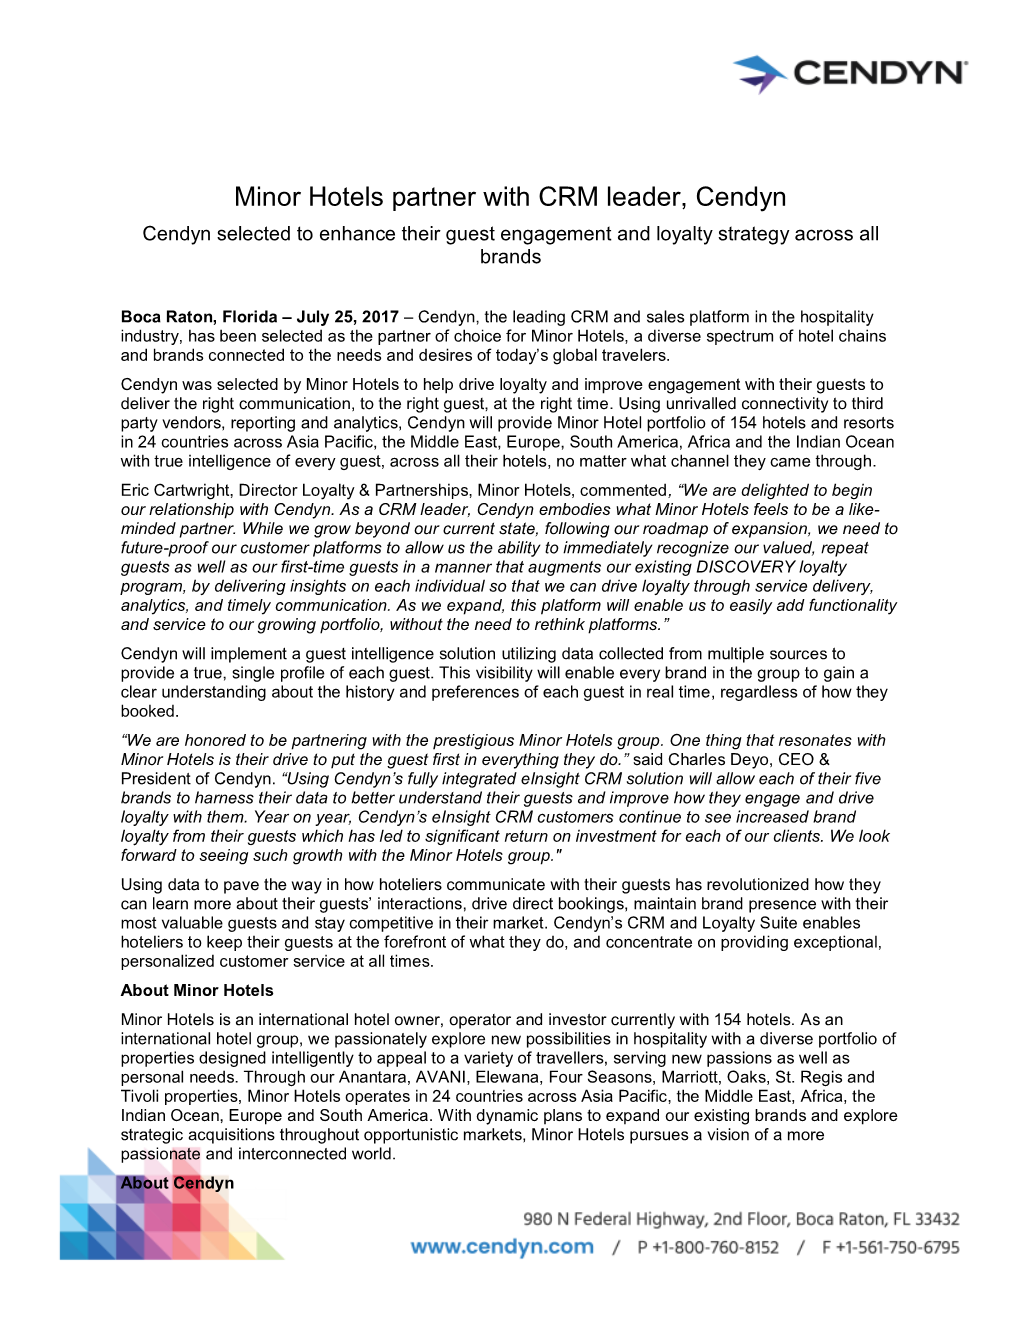 Minor Hotels Partner with CRM Leader, Cendyn Cendyn Selected to Enhance Their Guest Engagement and Loyalty Strategy Across All Brands